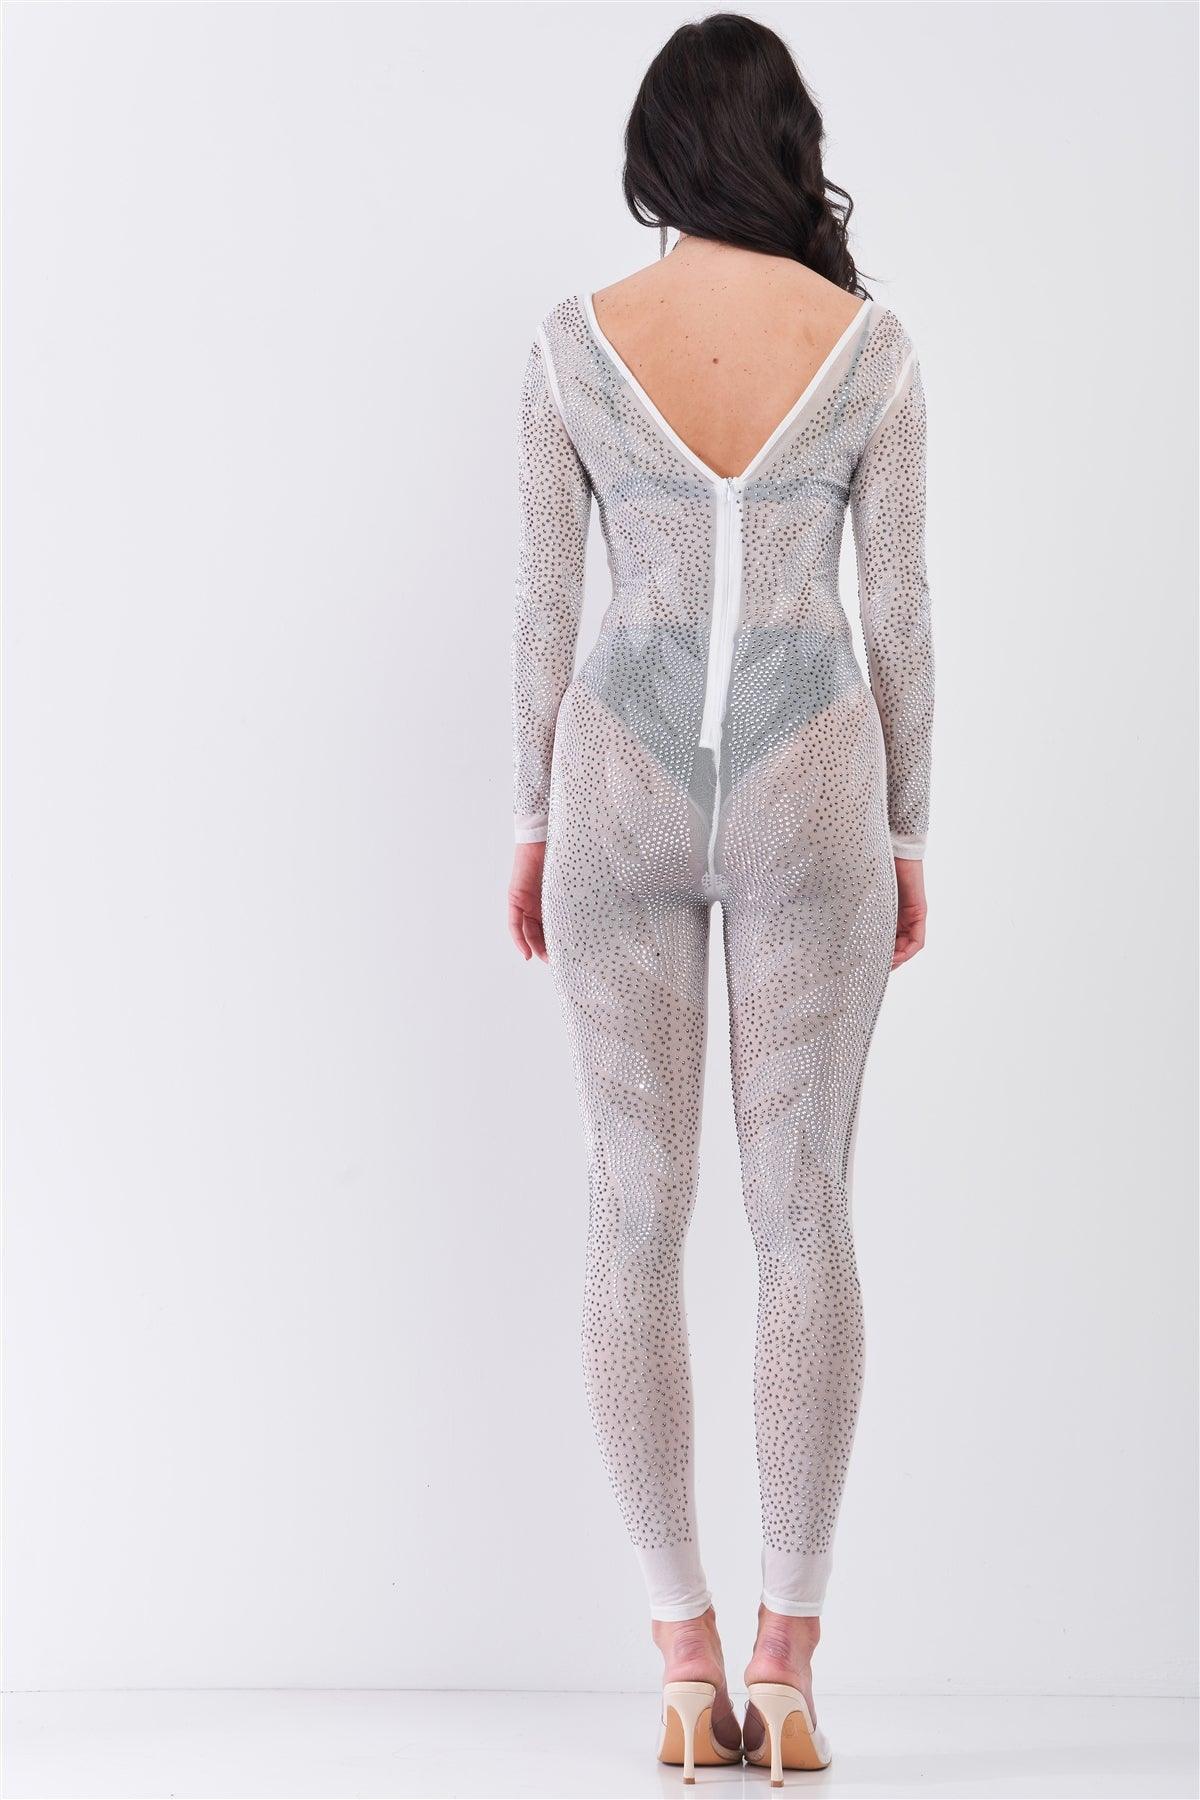 White Silver Rhinestone Embroidery Sheer Mesh Long Sleeve Bodycon Jumpsuit